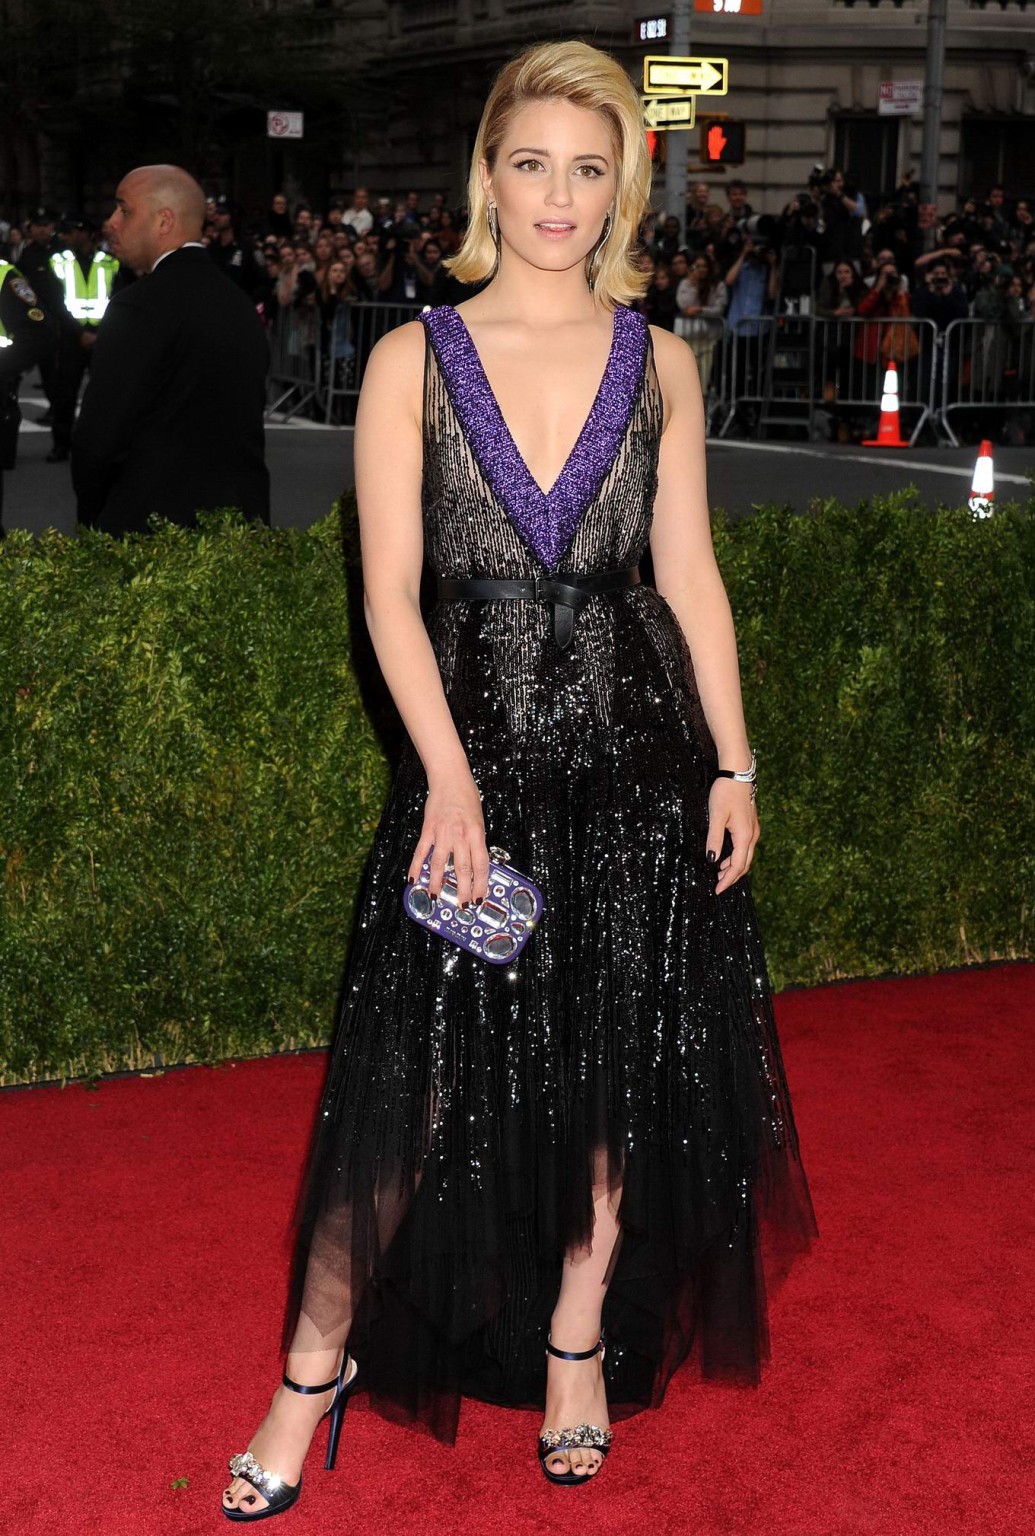 Dianna Aragon showing cleavage at the 2014 Met Gala in NYC #75196820